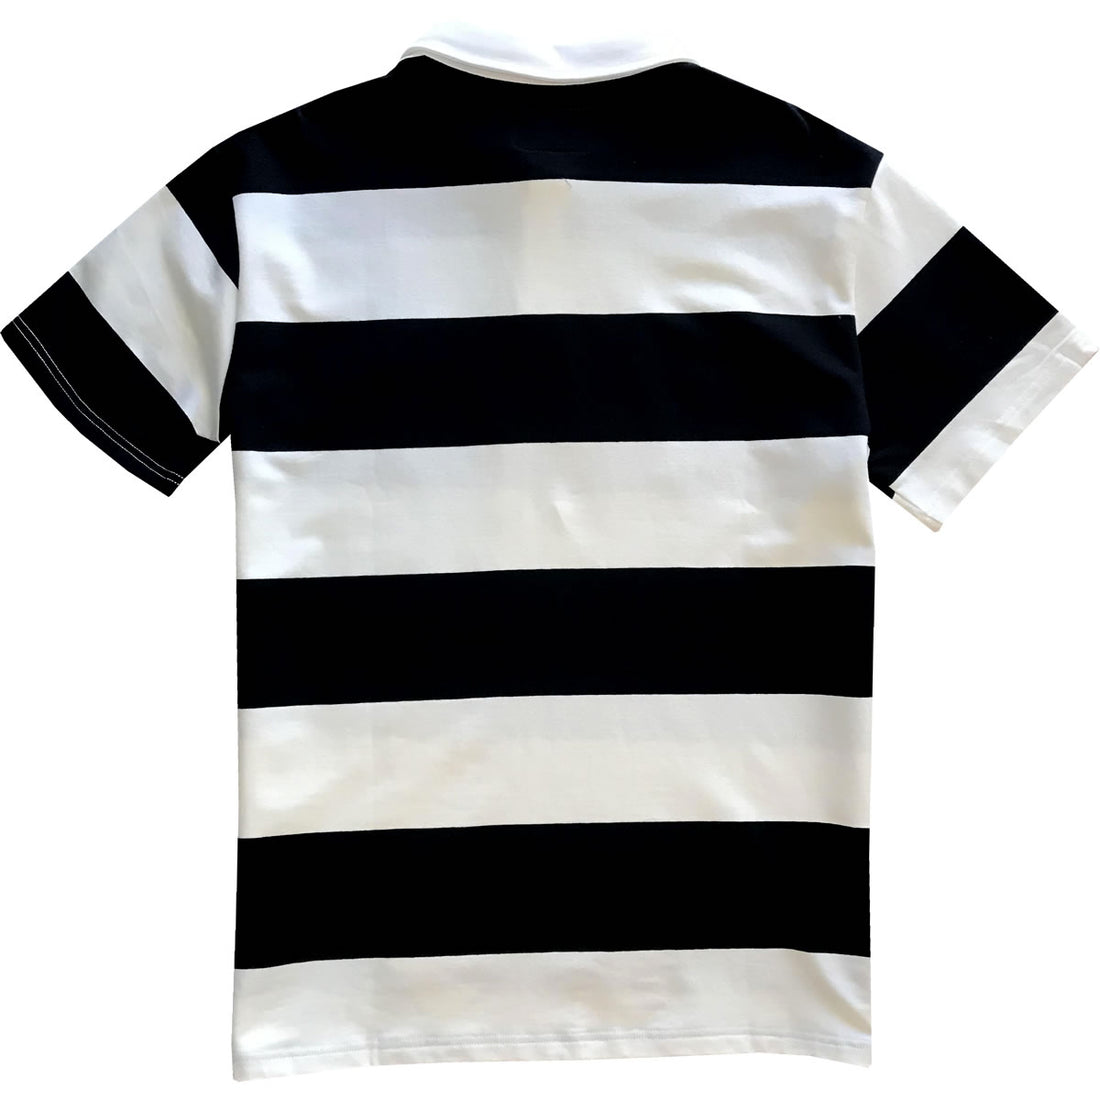 Black and White Short Sleeve Striped Men's Rugby Shirt Back